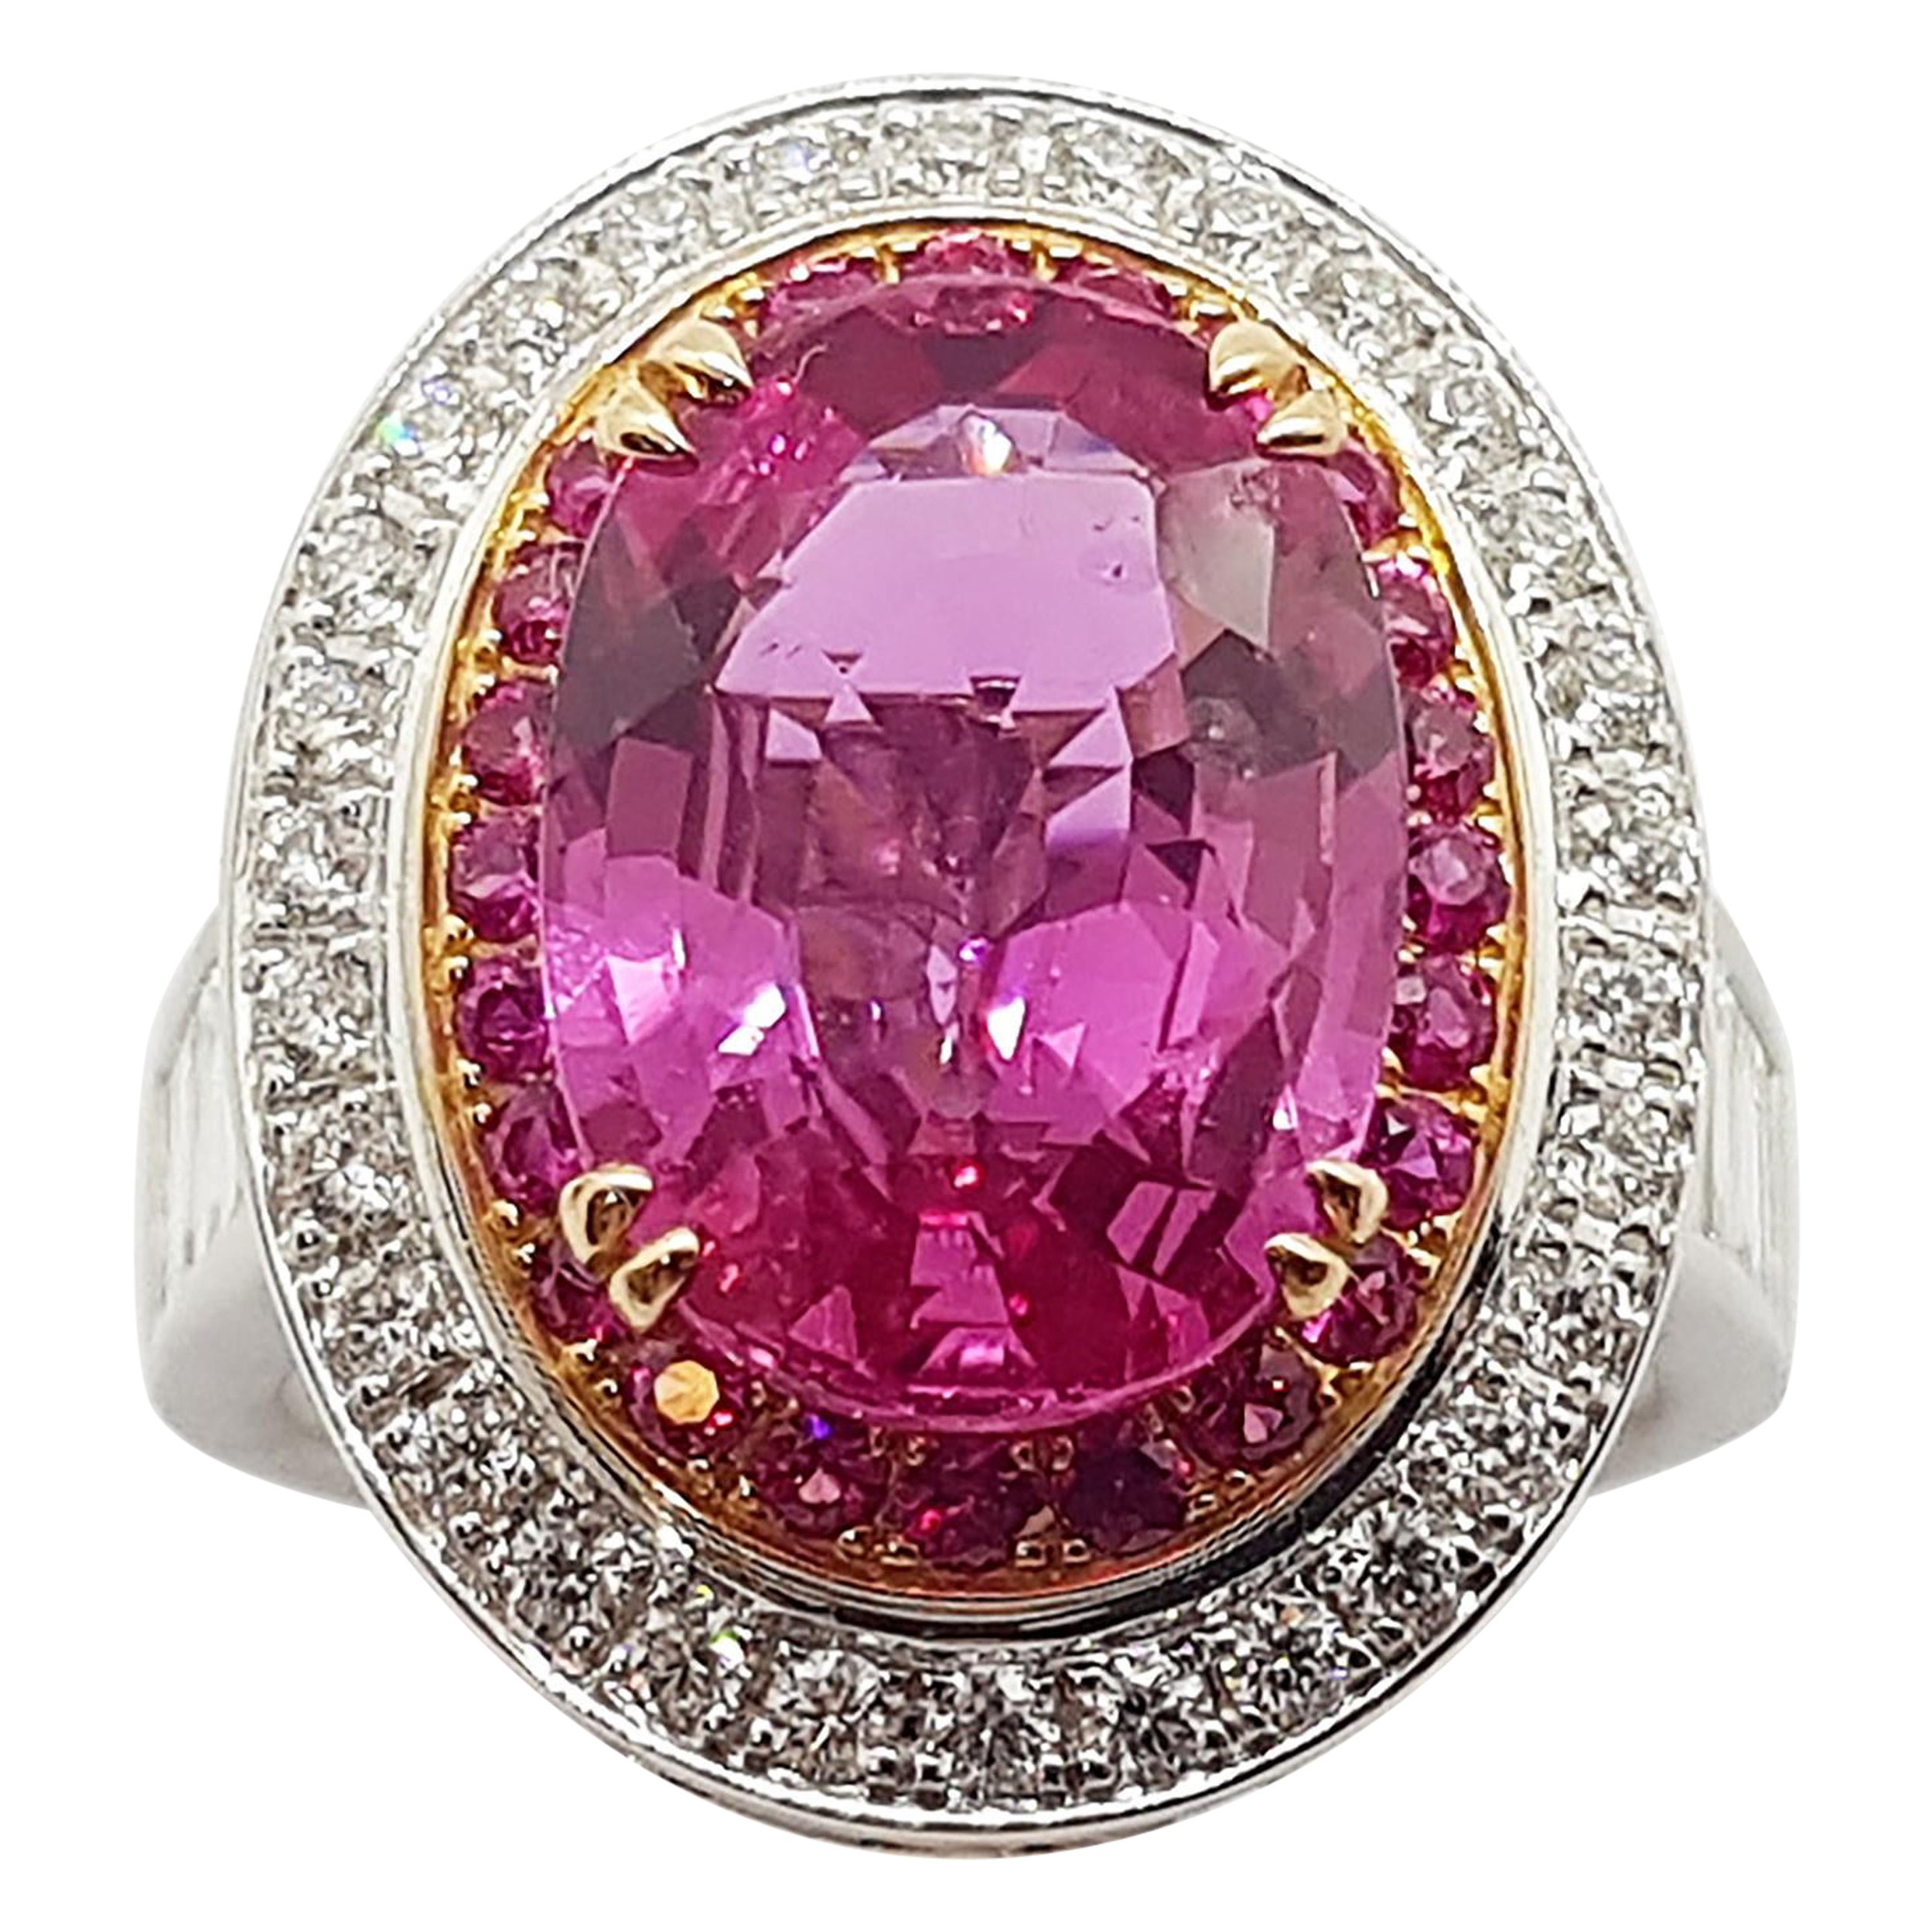 Certified 5 Cts Pink Sapphire with Diamond Ring Set in 18 Karat White Gold For Sale